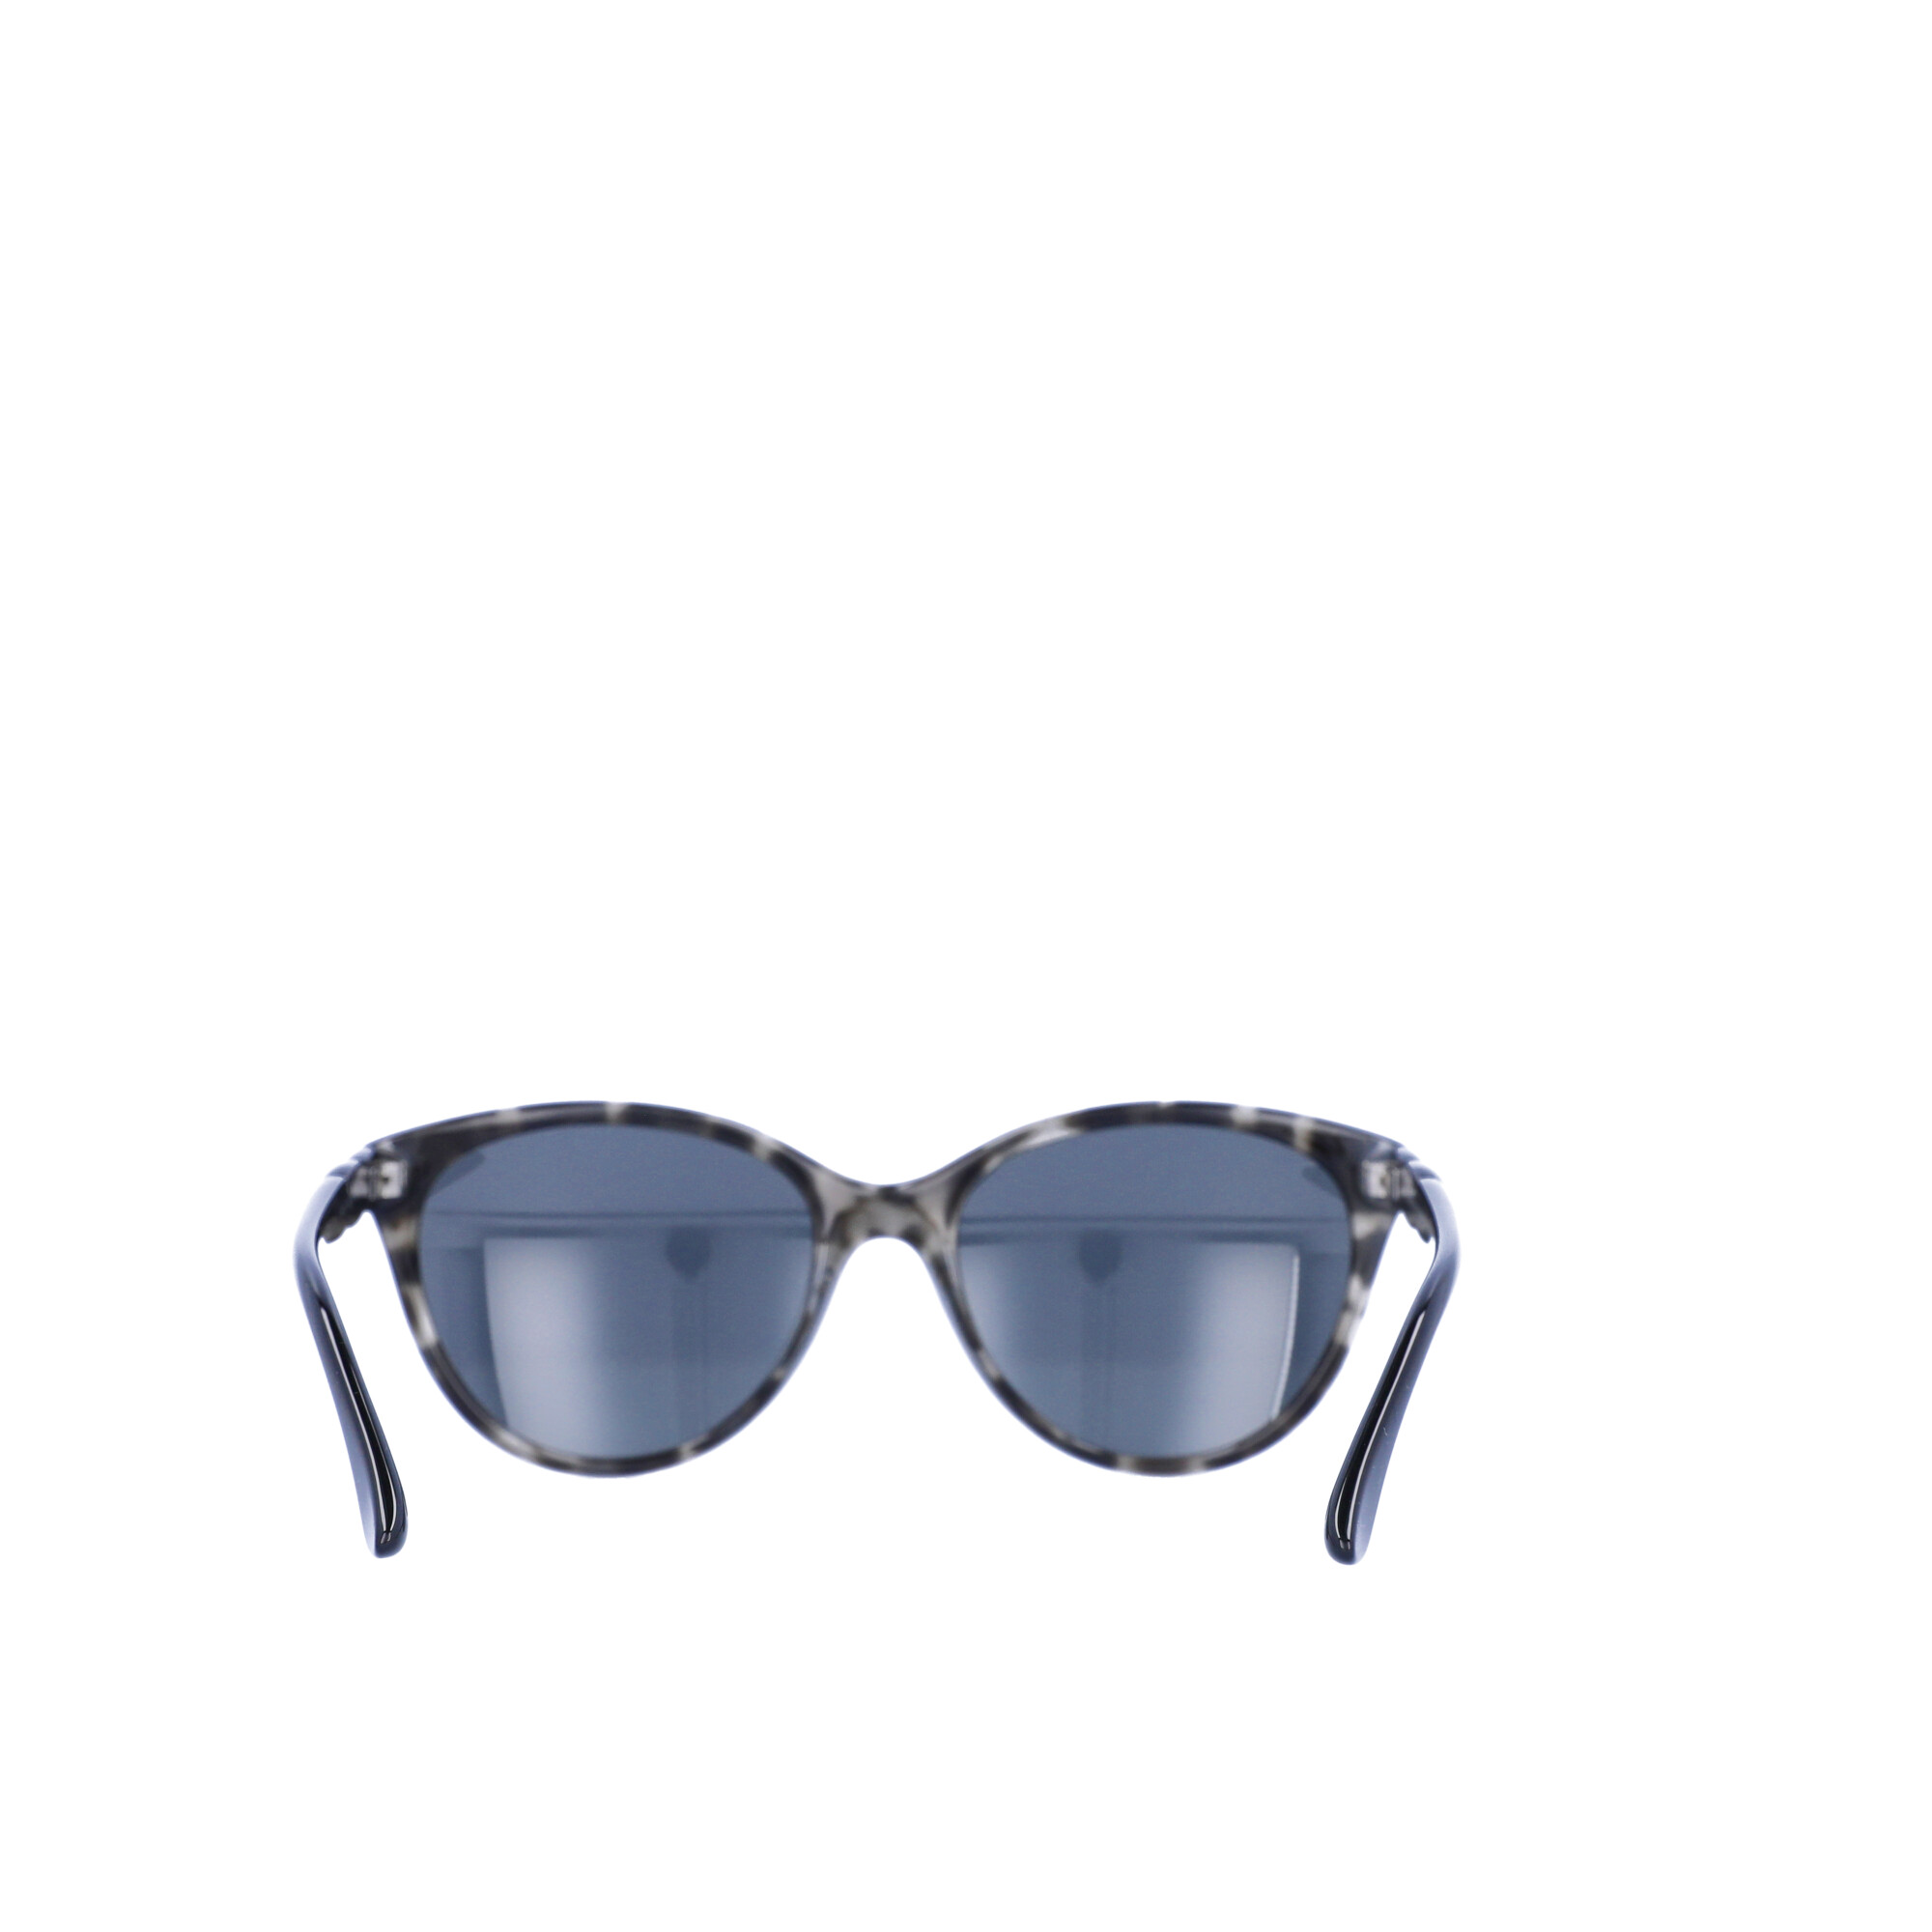 Hard Candy Womens Rx'able Sunglasses, Hs13, Black Tortoise Patterned, 55-18-142, with Case - image 3 of 13